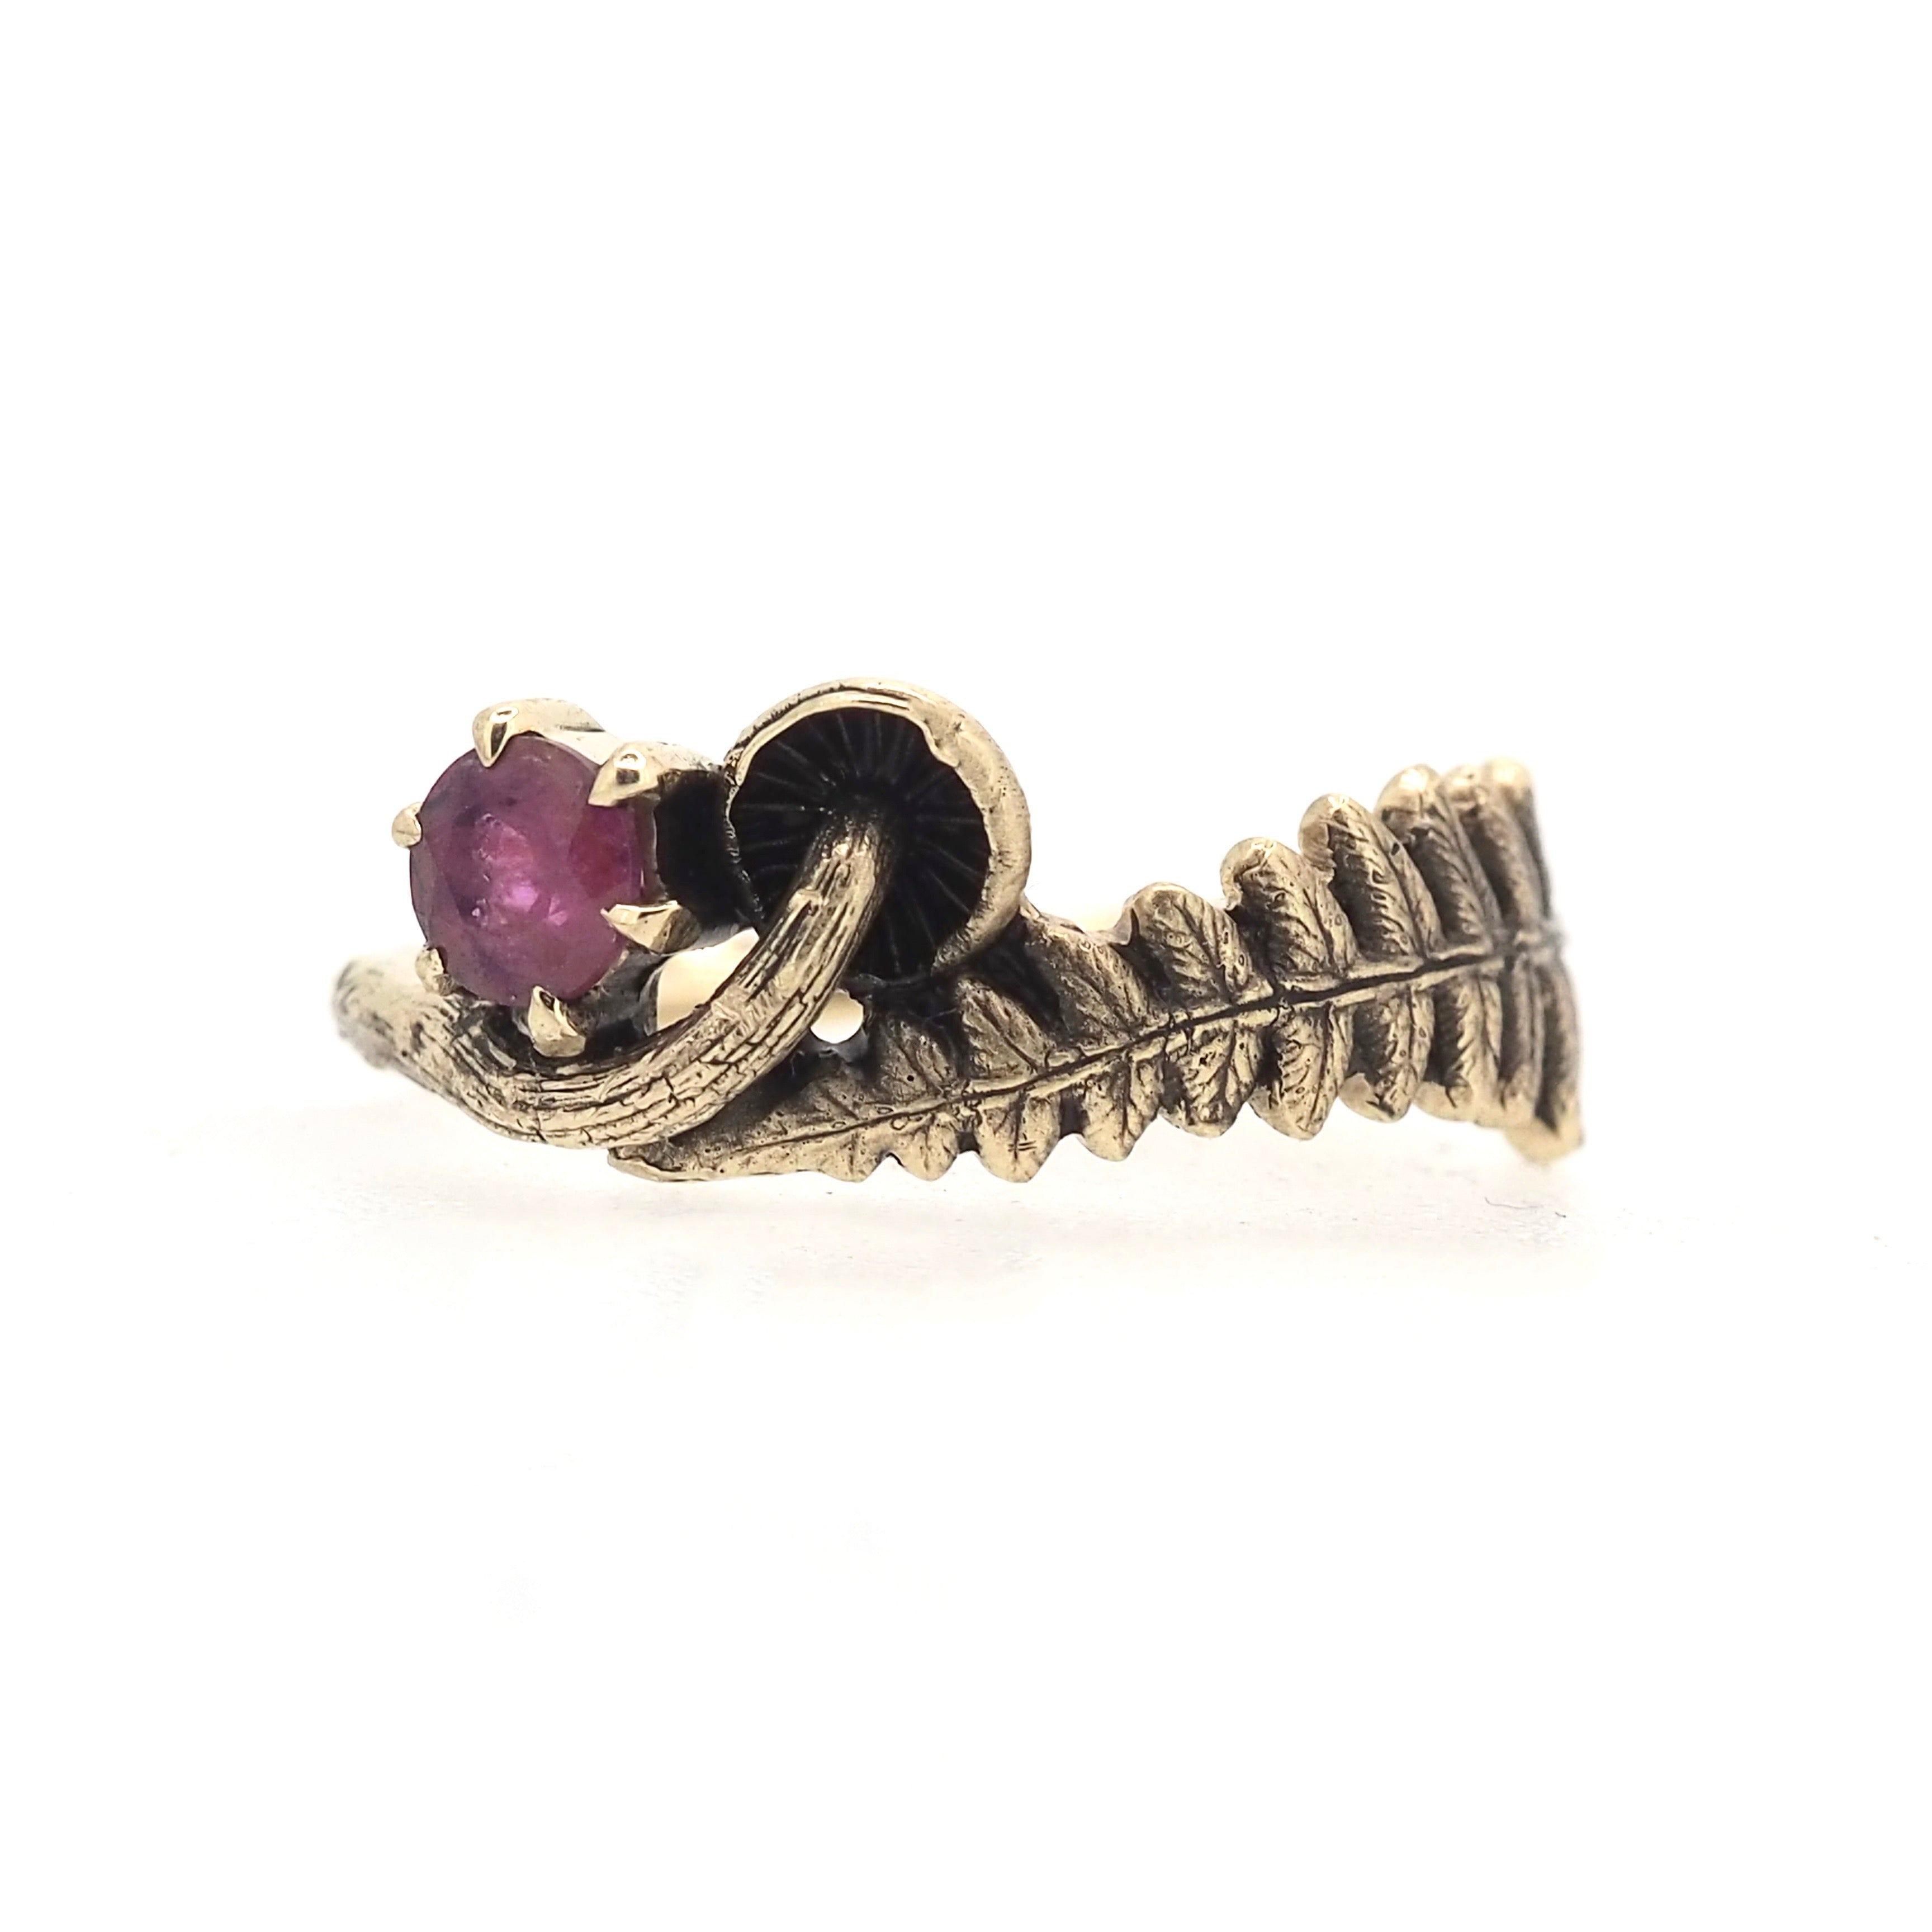 Fern and mushroom ring with ruby